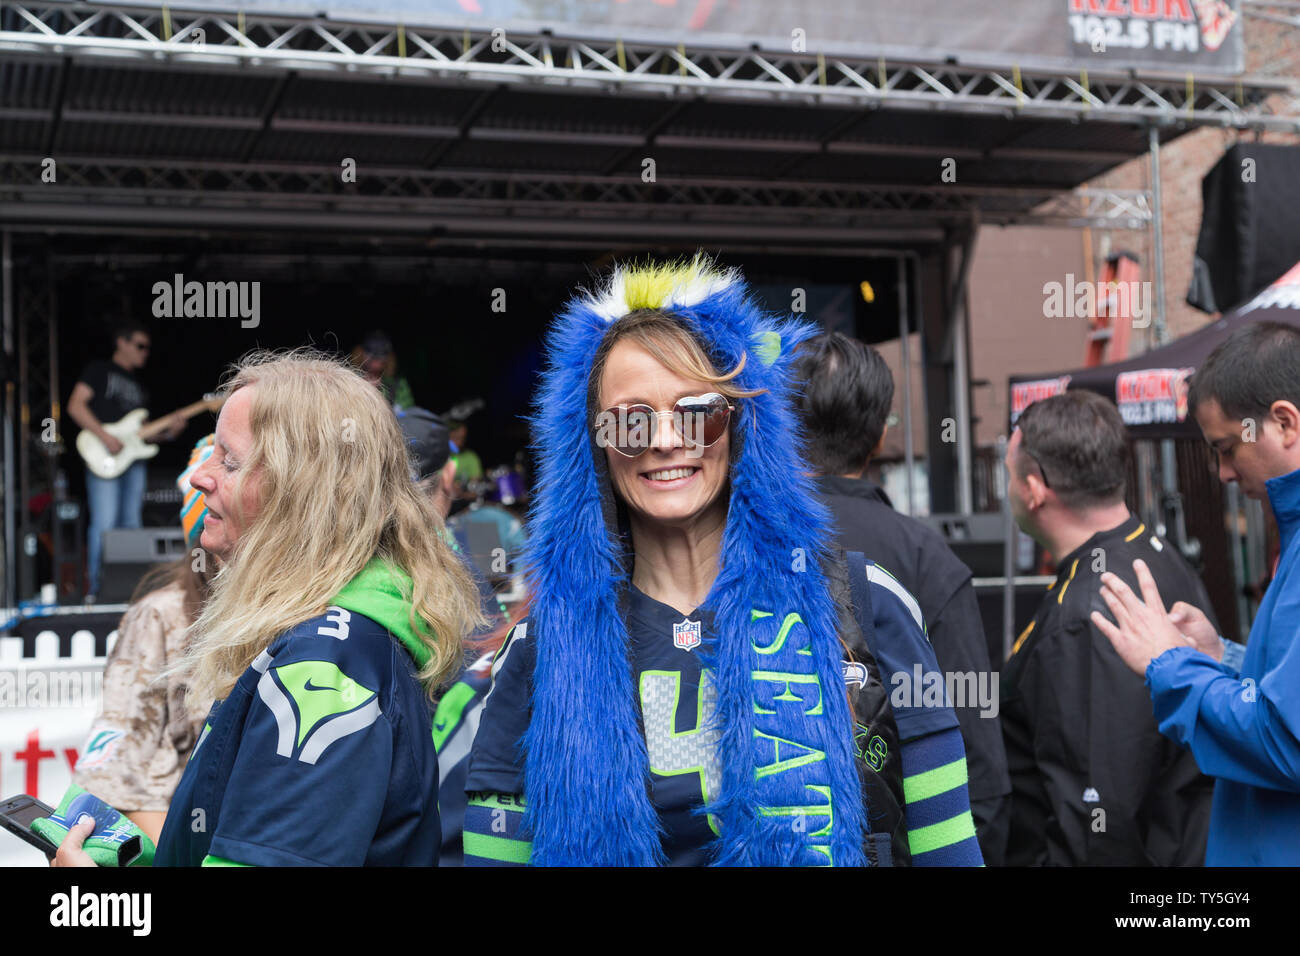 On game day, Seattle Seahawks fans dressed in their team jersey enjoy the pre game tailgate party hosted by a local radio station for the home game. Stock Photo